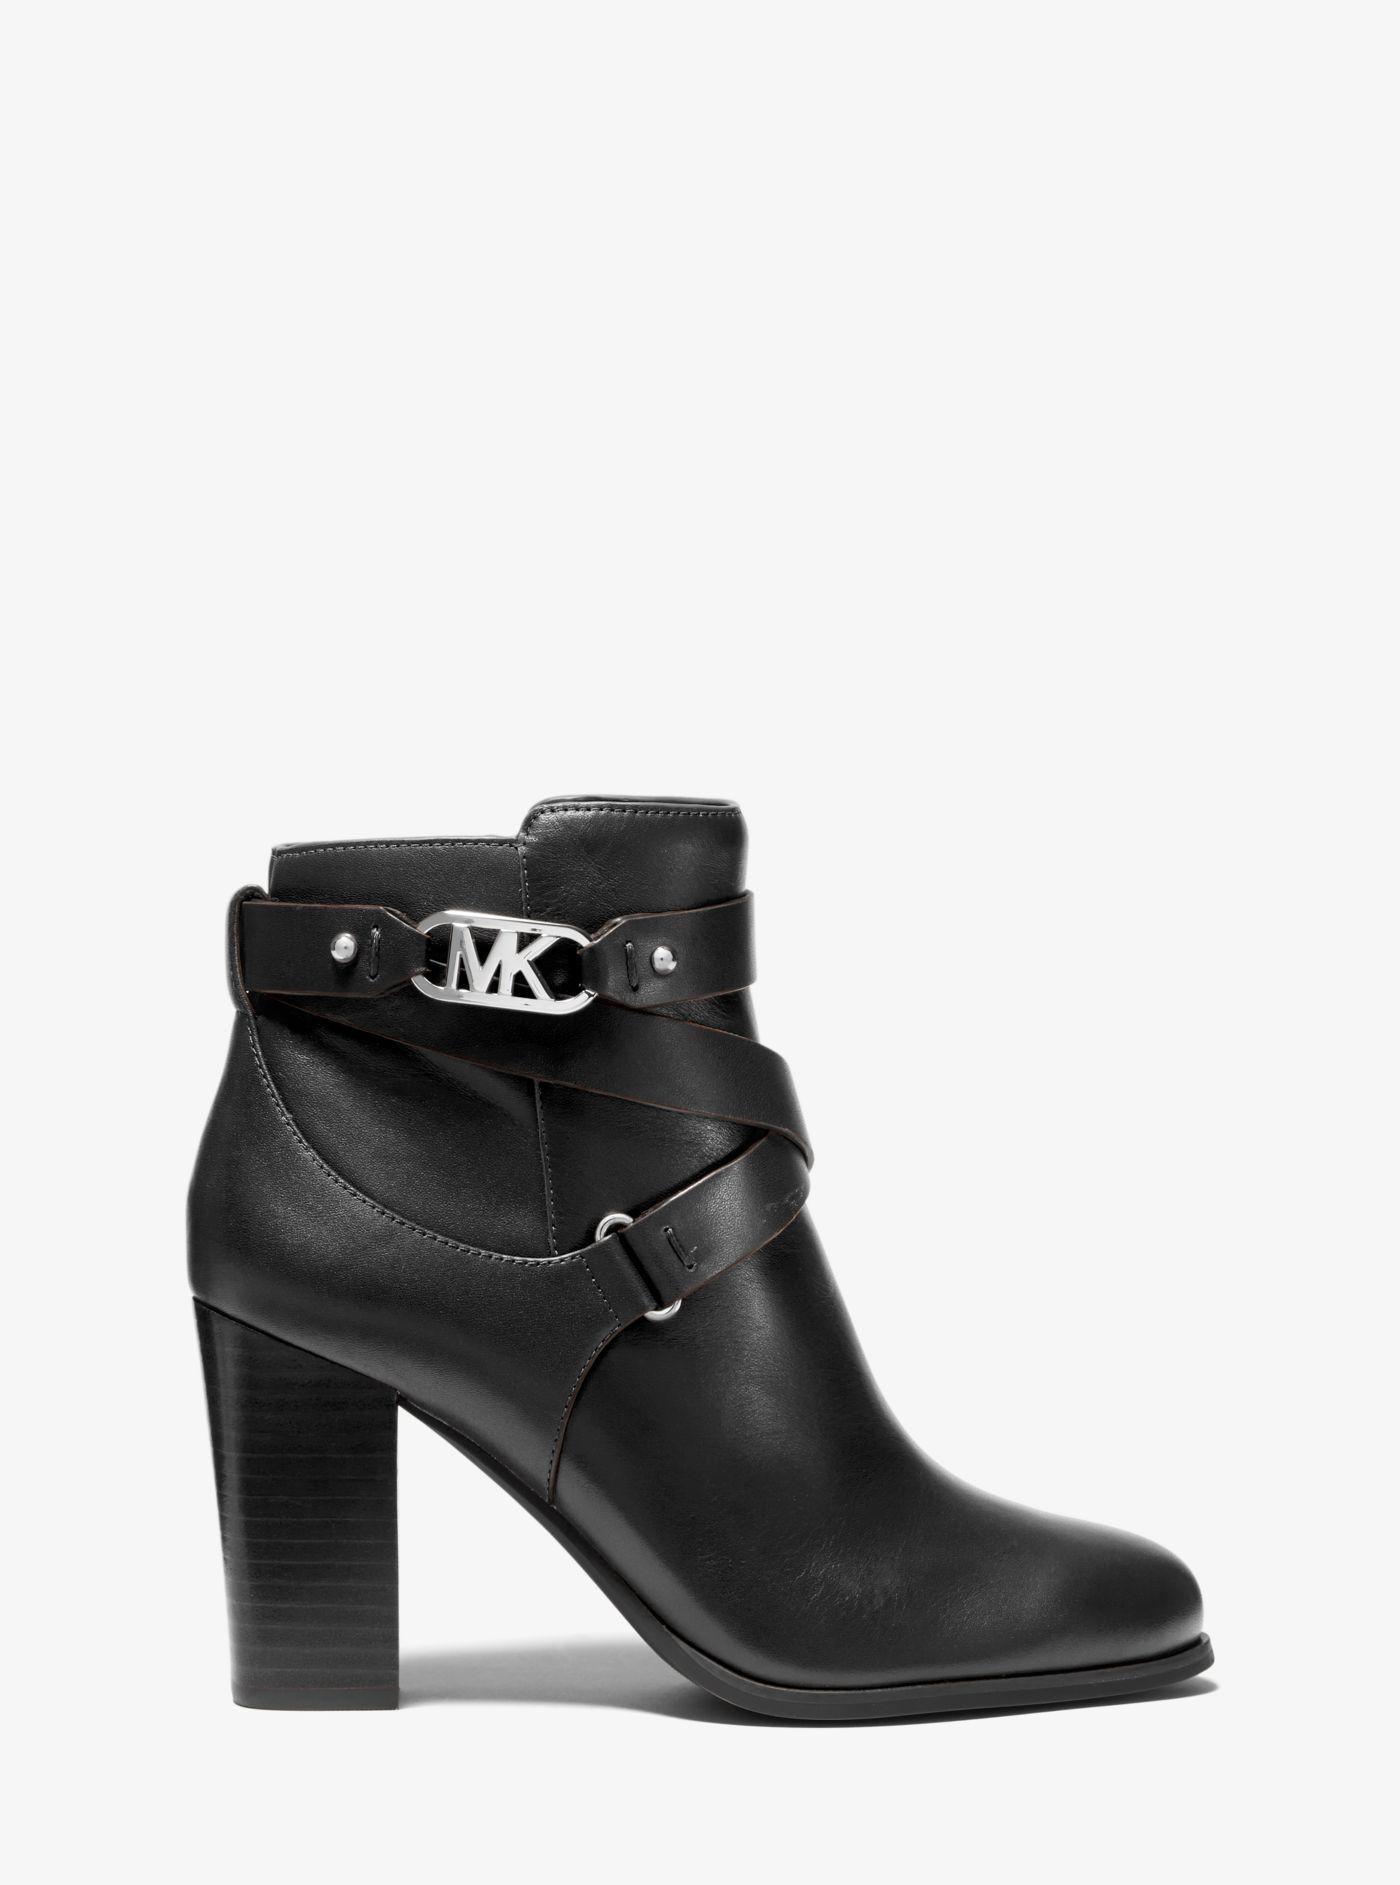 Michael Kors Kincaid Leather Ankle Boot in Black - Lyst